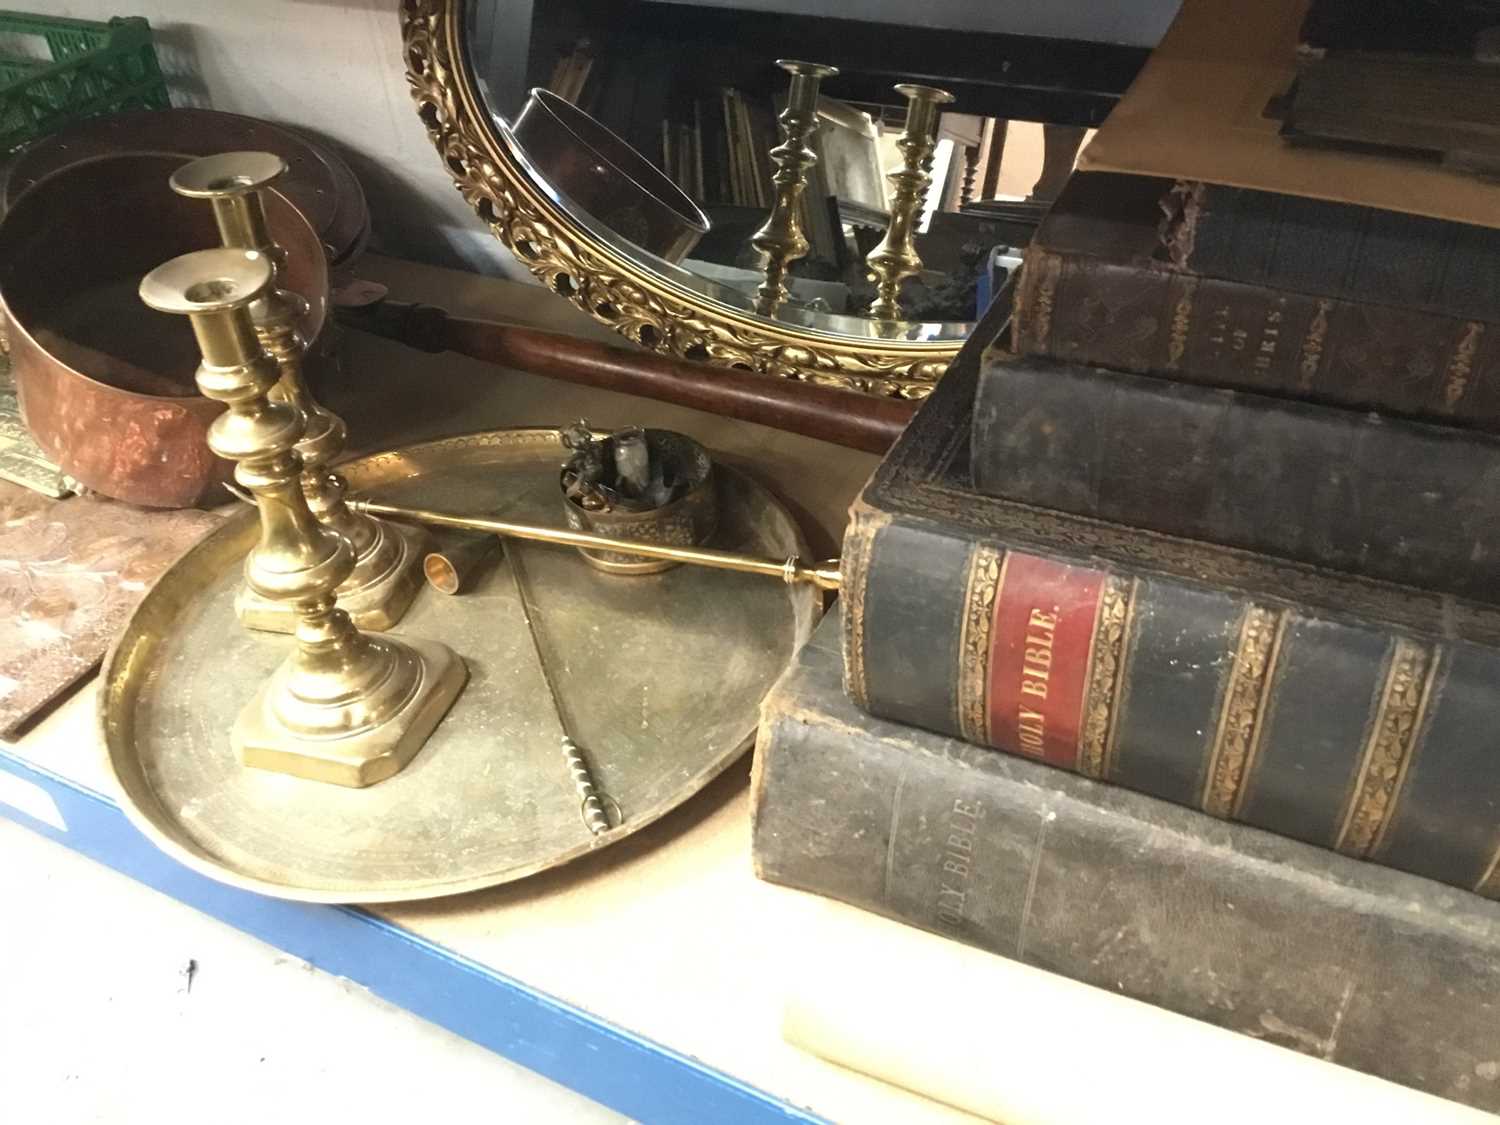 Antique Bibles, Victorian brass candlesticks, copper bed warmer, metalwork and sundries